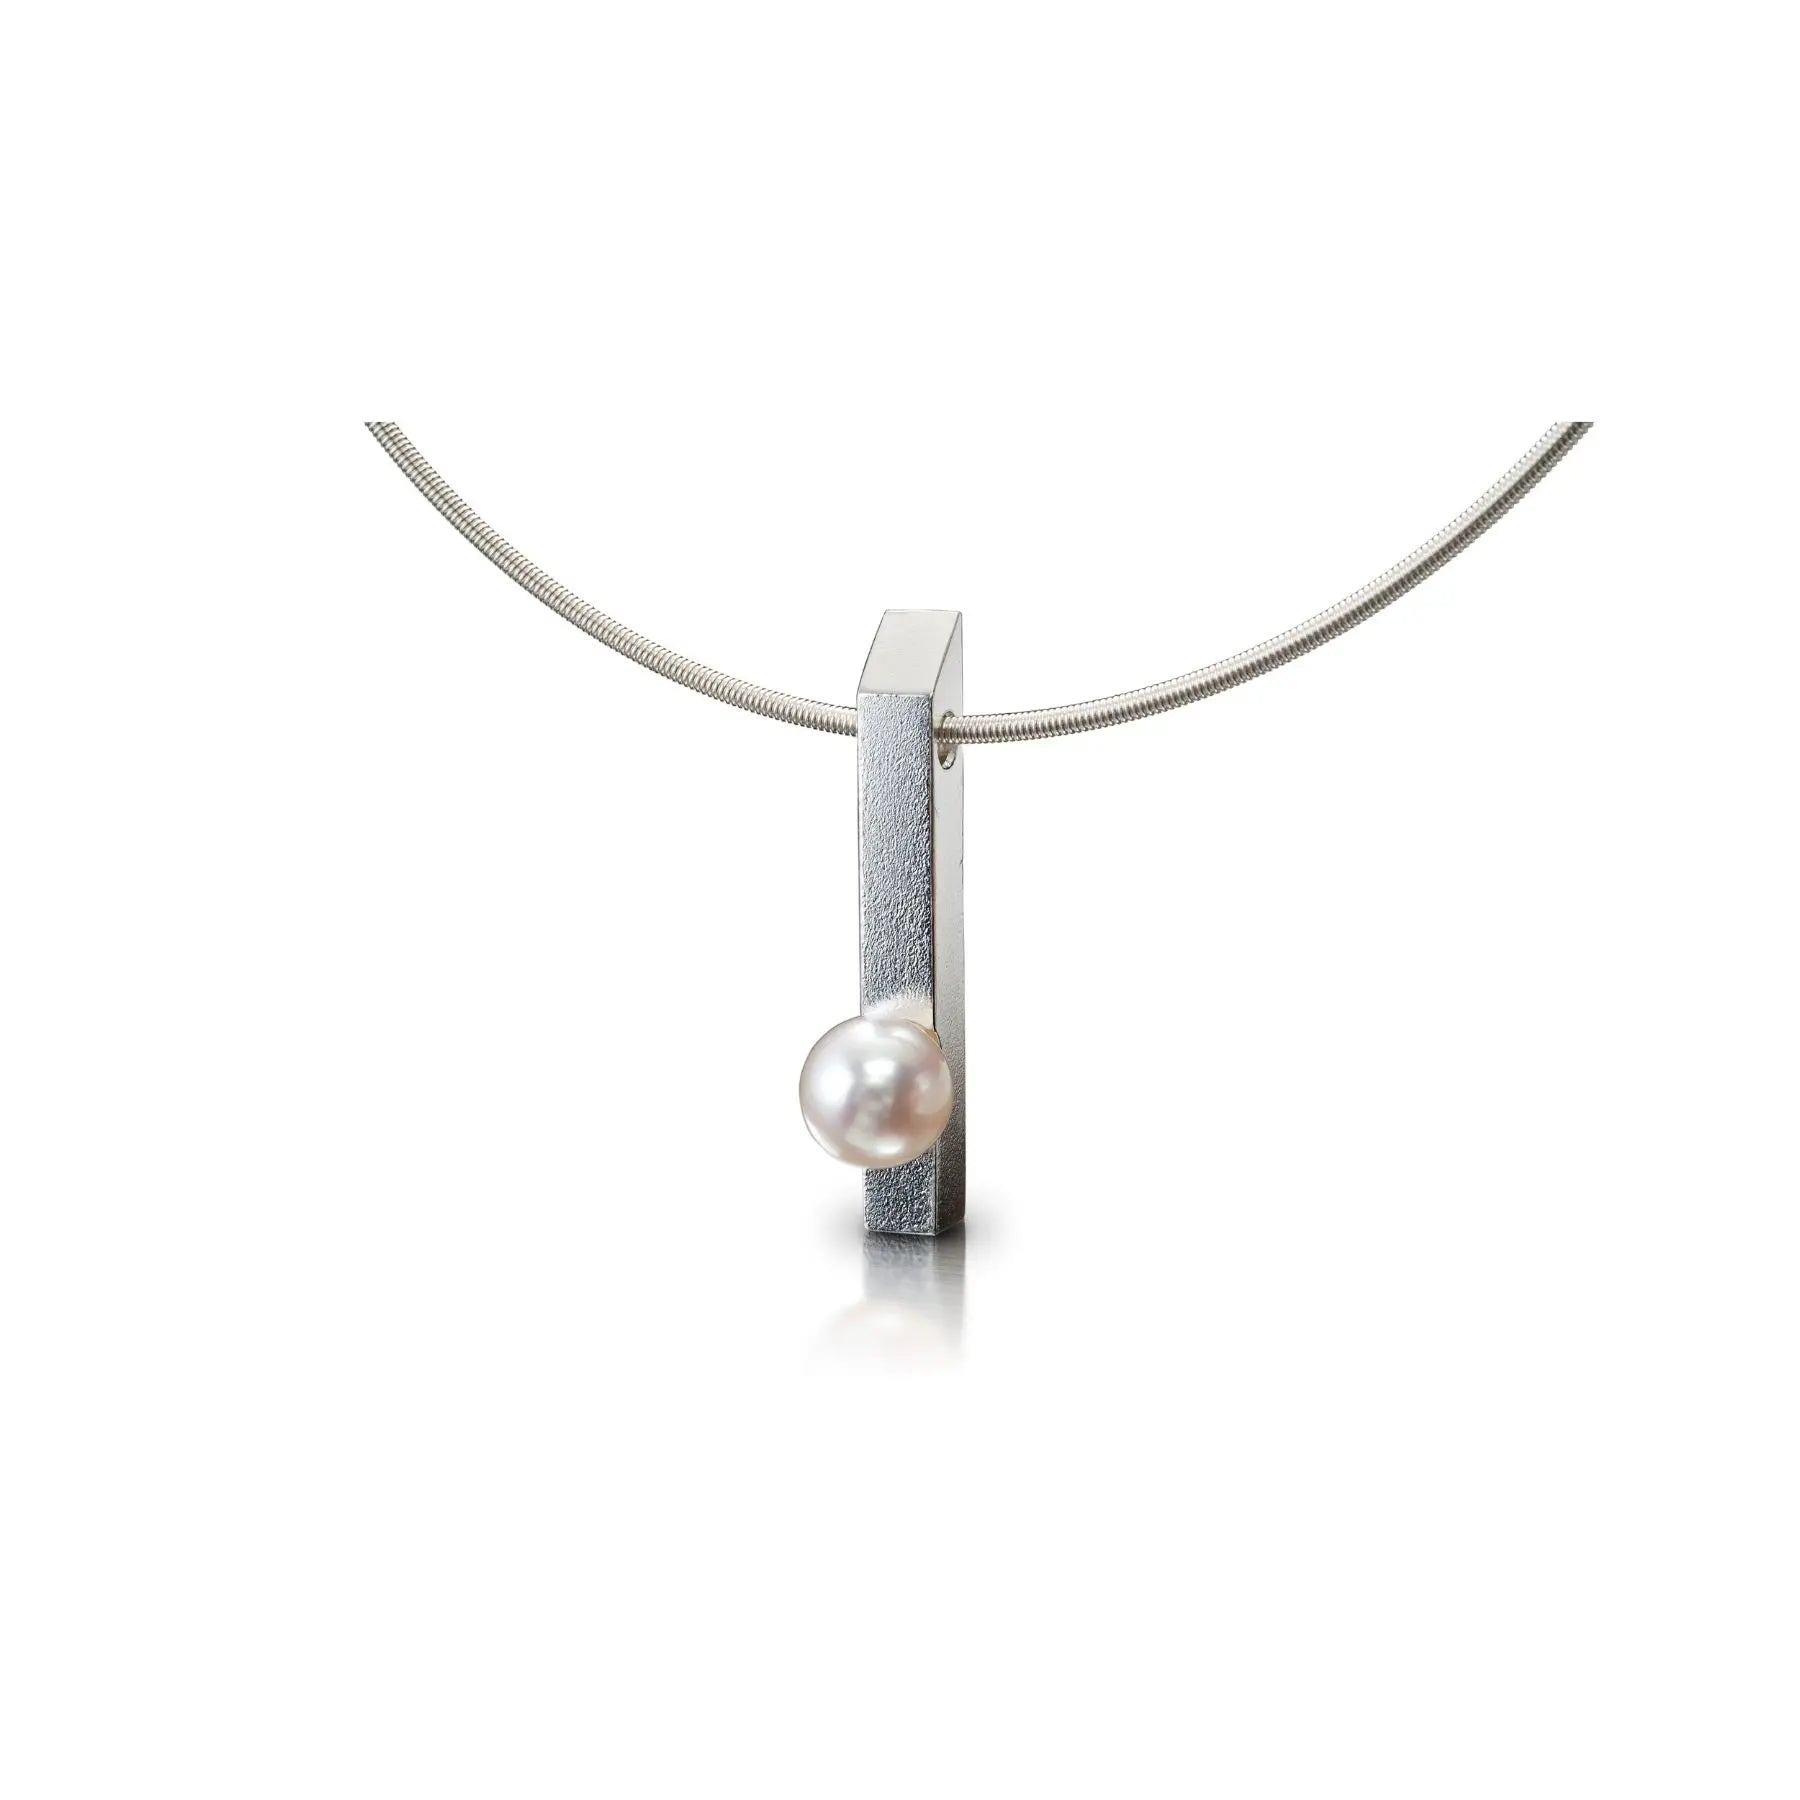 Rectangular Pearl Bar Pendant With Freshwater Pearl-Long Bar Collection Gemstones Pearls